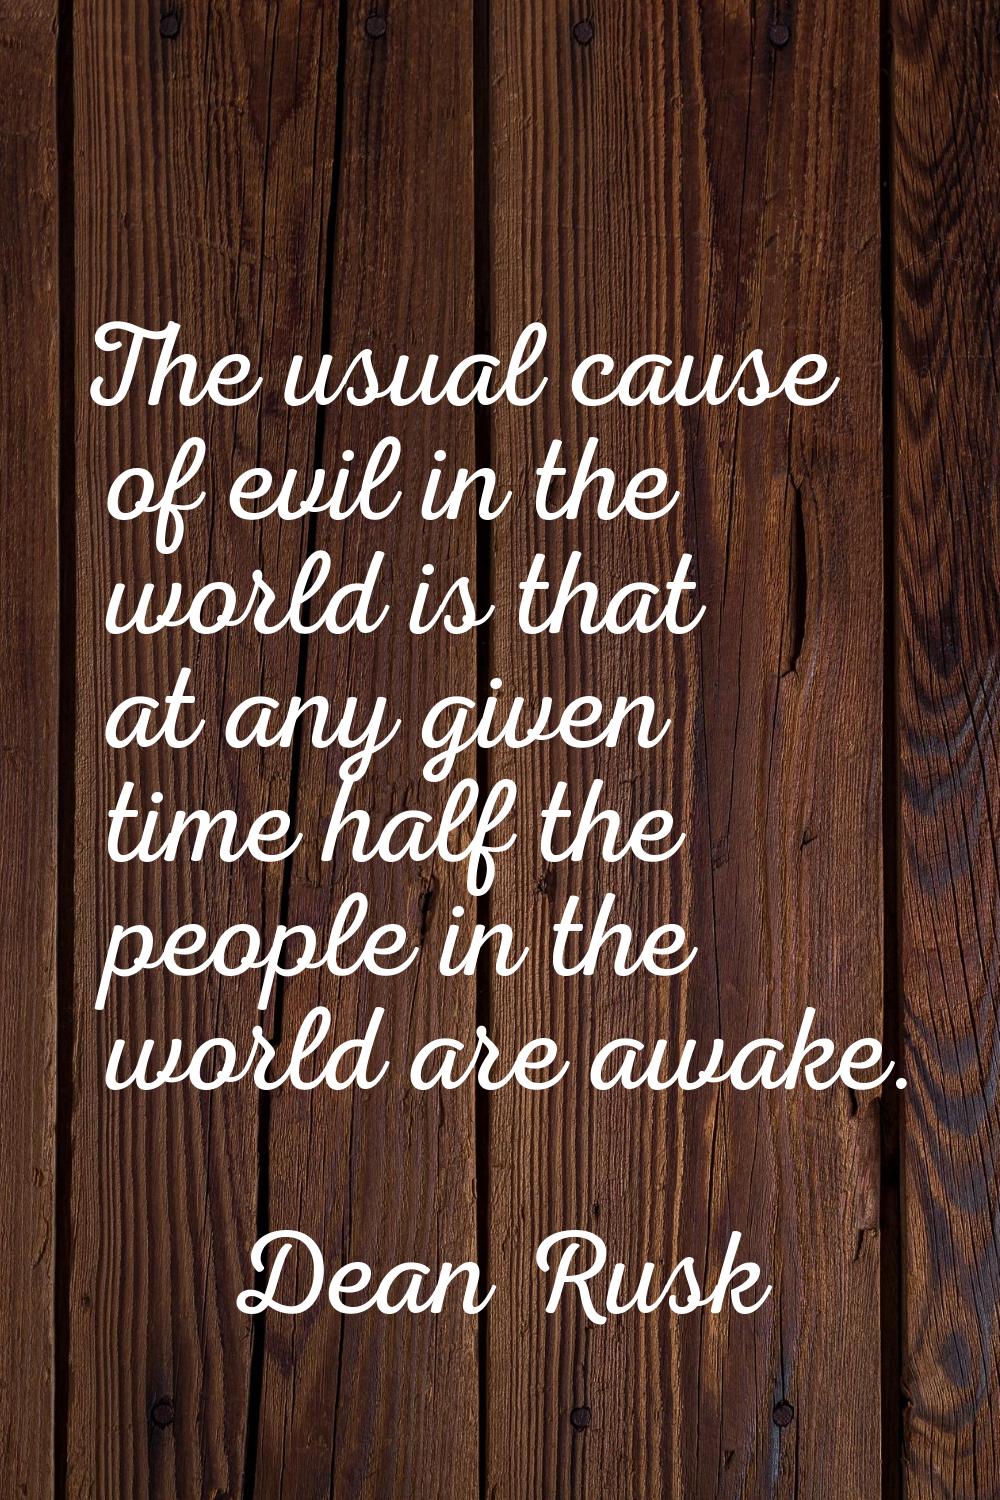 The usual cause of evil in the world is that at any given time half the people in the world are awa